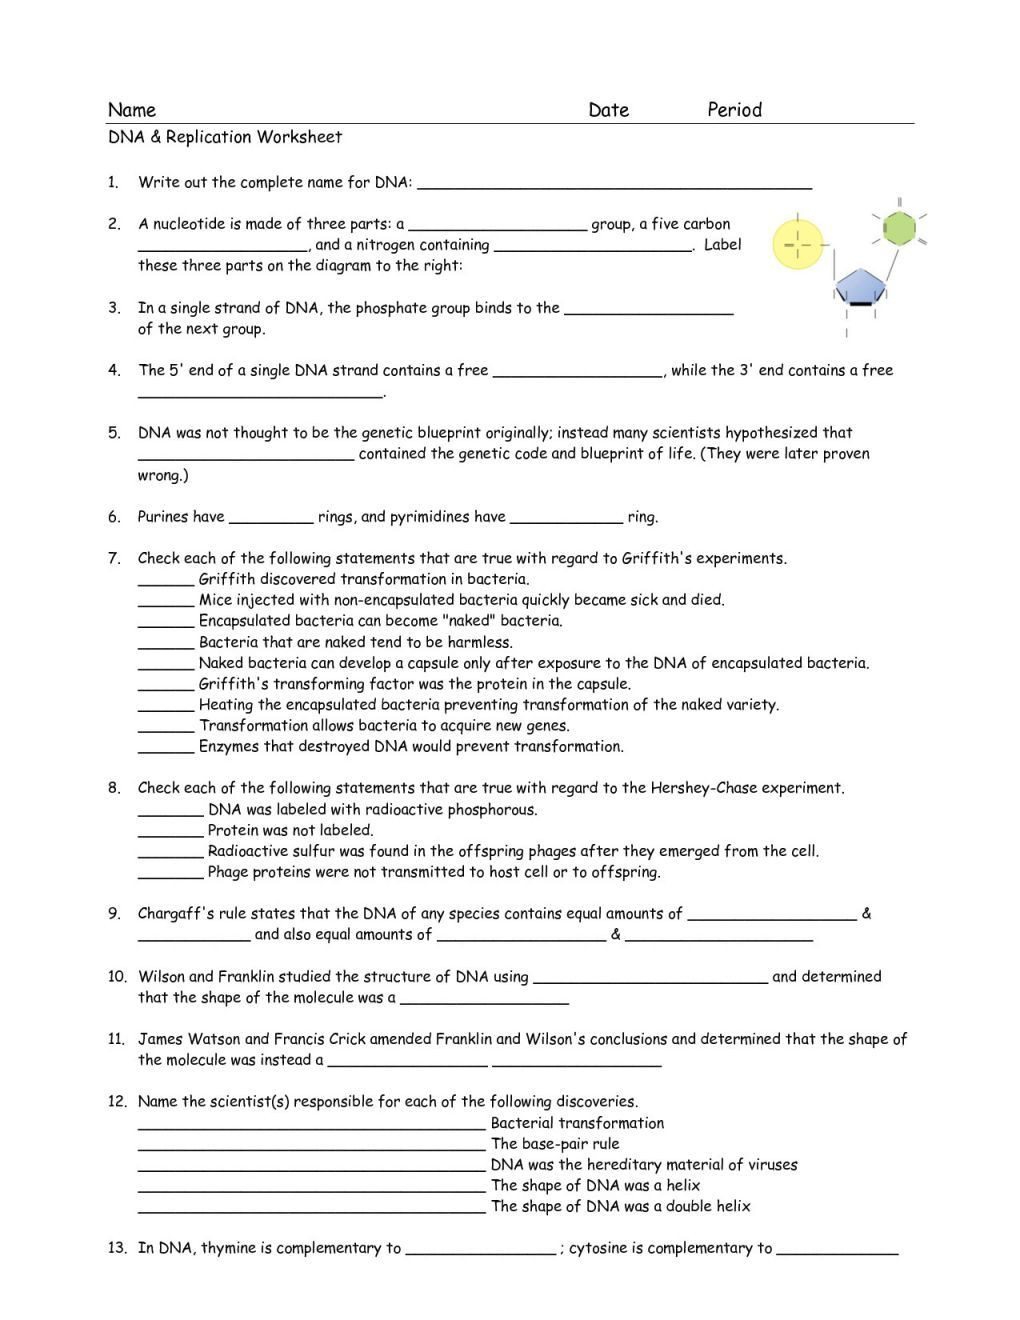 Dna Structure and Replication Worksheet 33 Structure Dna and Replication Worksheet Answers